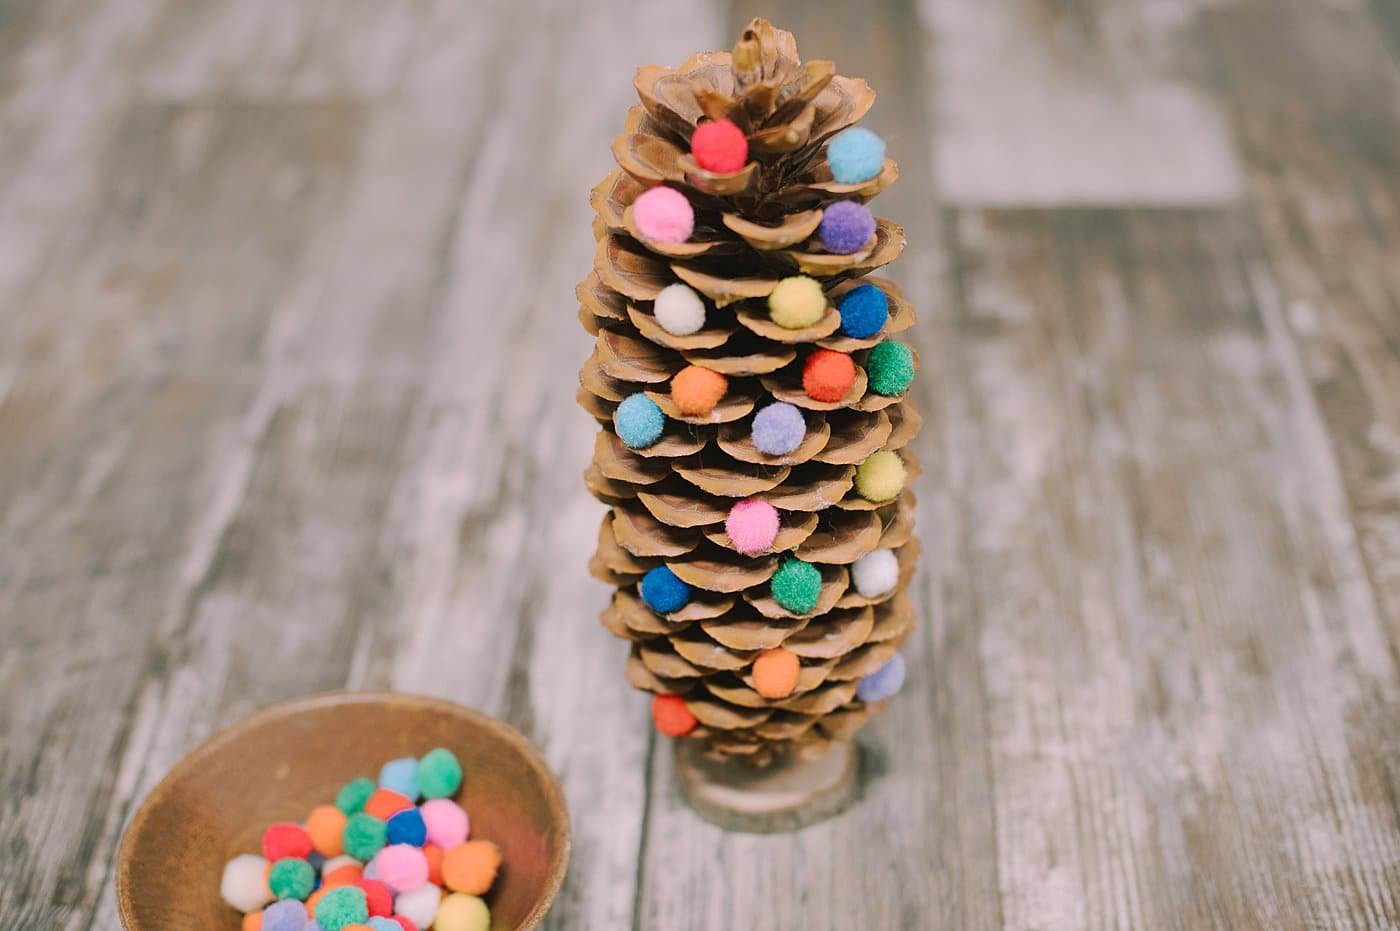 Hot glue pom poms onto the ends of the giant pinecone.